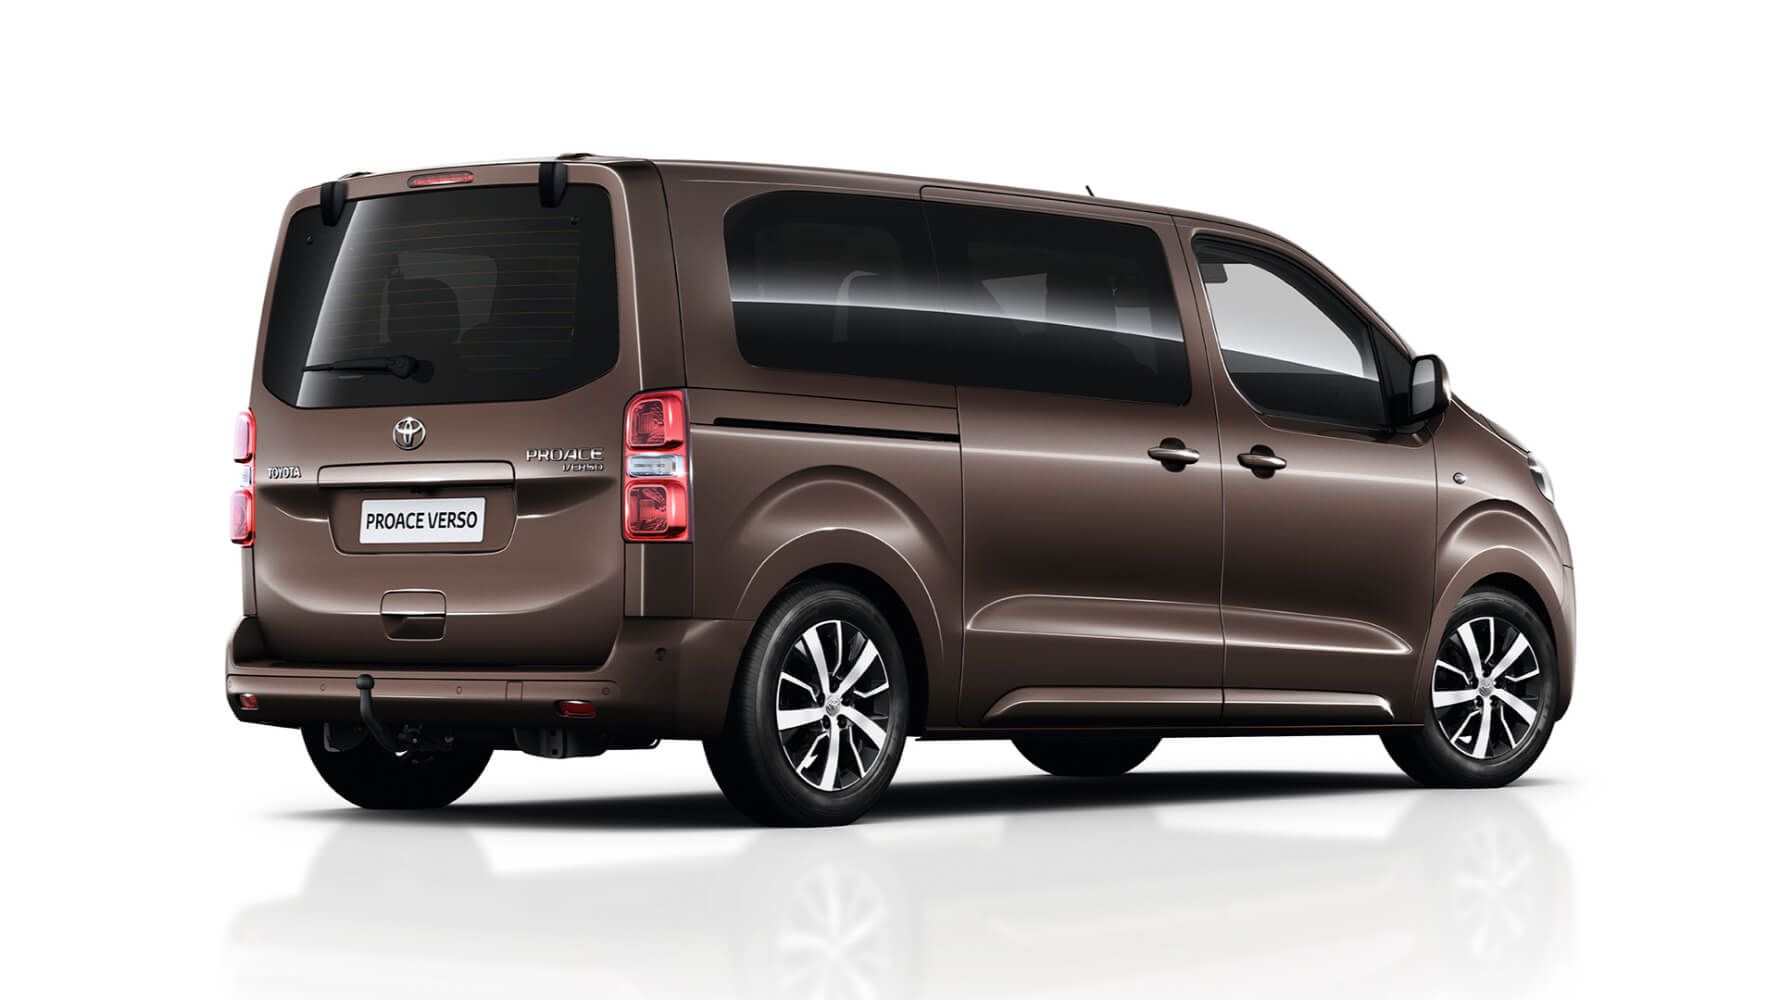 toyota_proace_verso_2019_gallery_019_full_tcm_3046_1703811